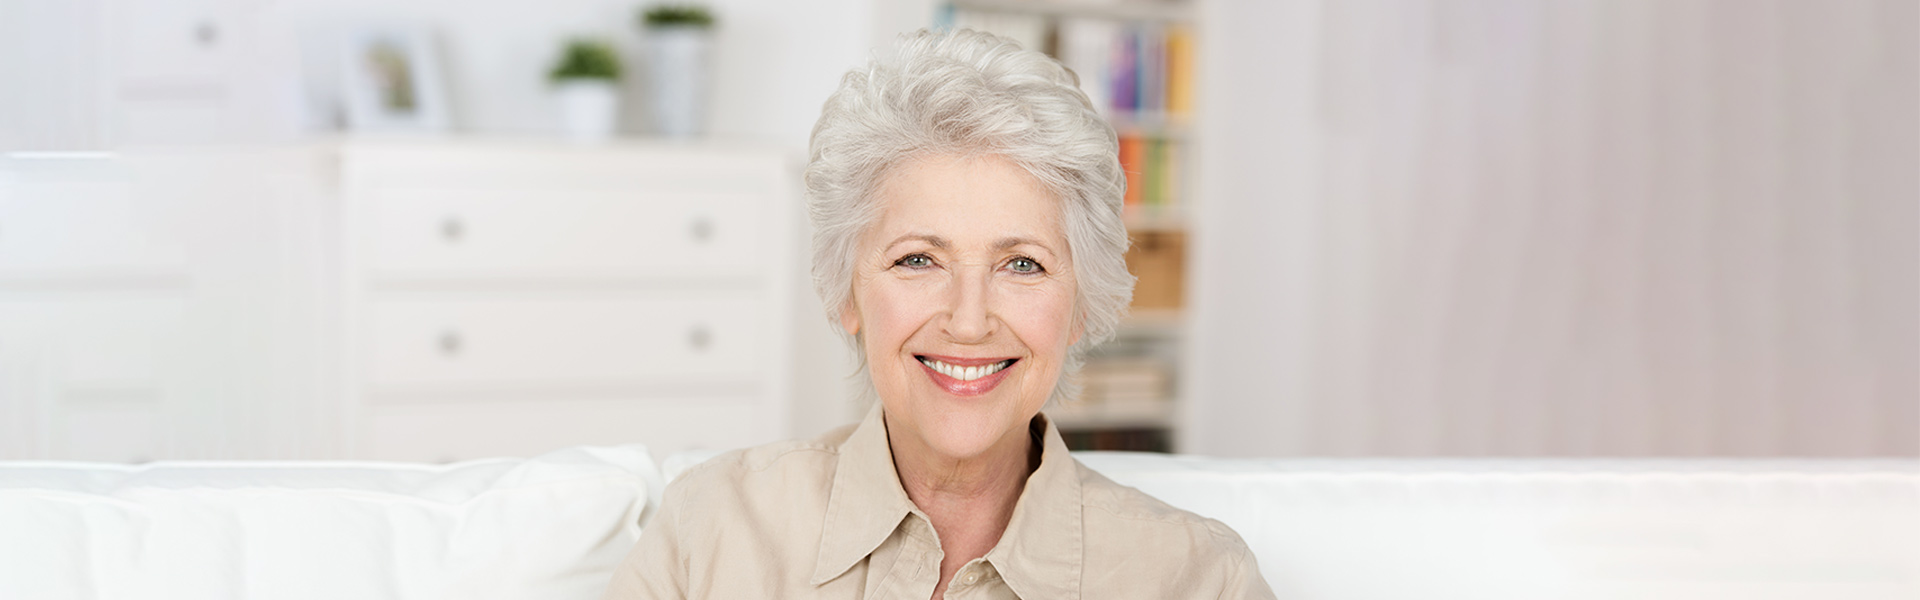 Five Signs That Dental Implants Are The Right Choice For You